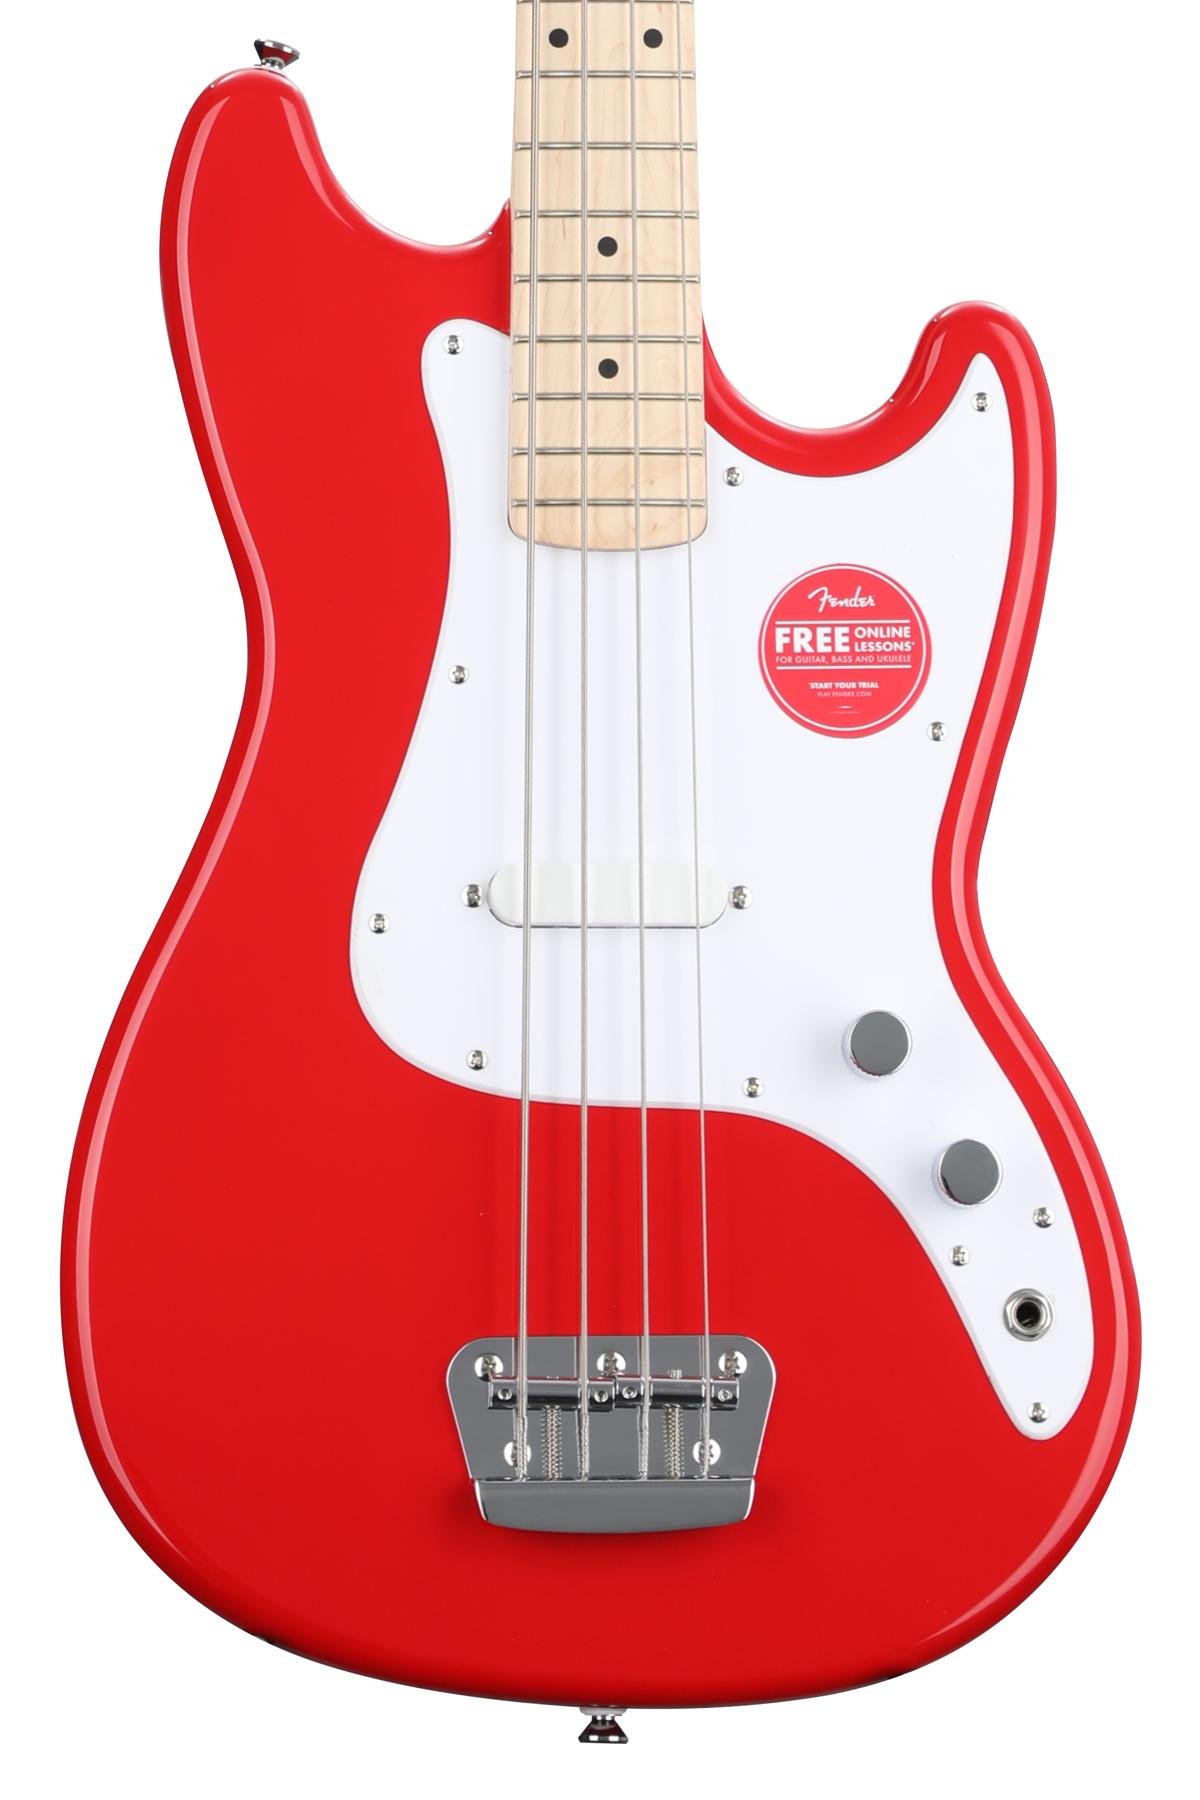 Squier Bronco Bass Guitar - Torino Red | Sweetwater